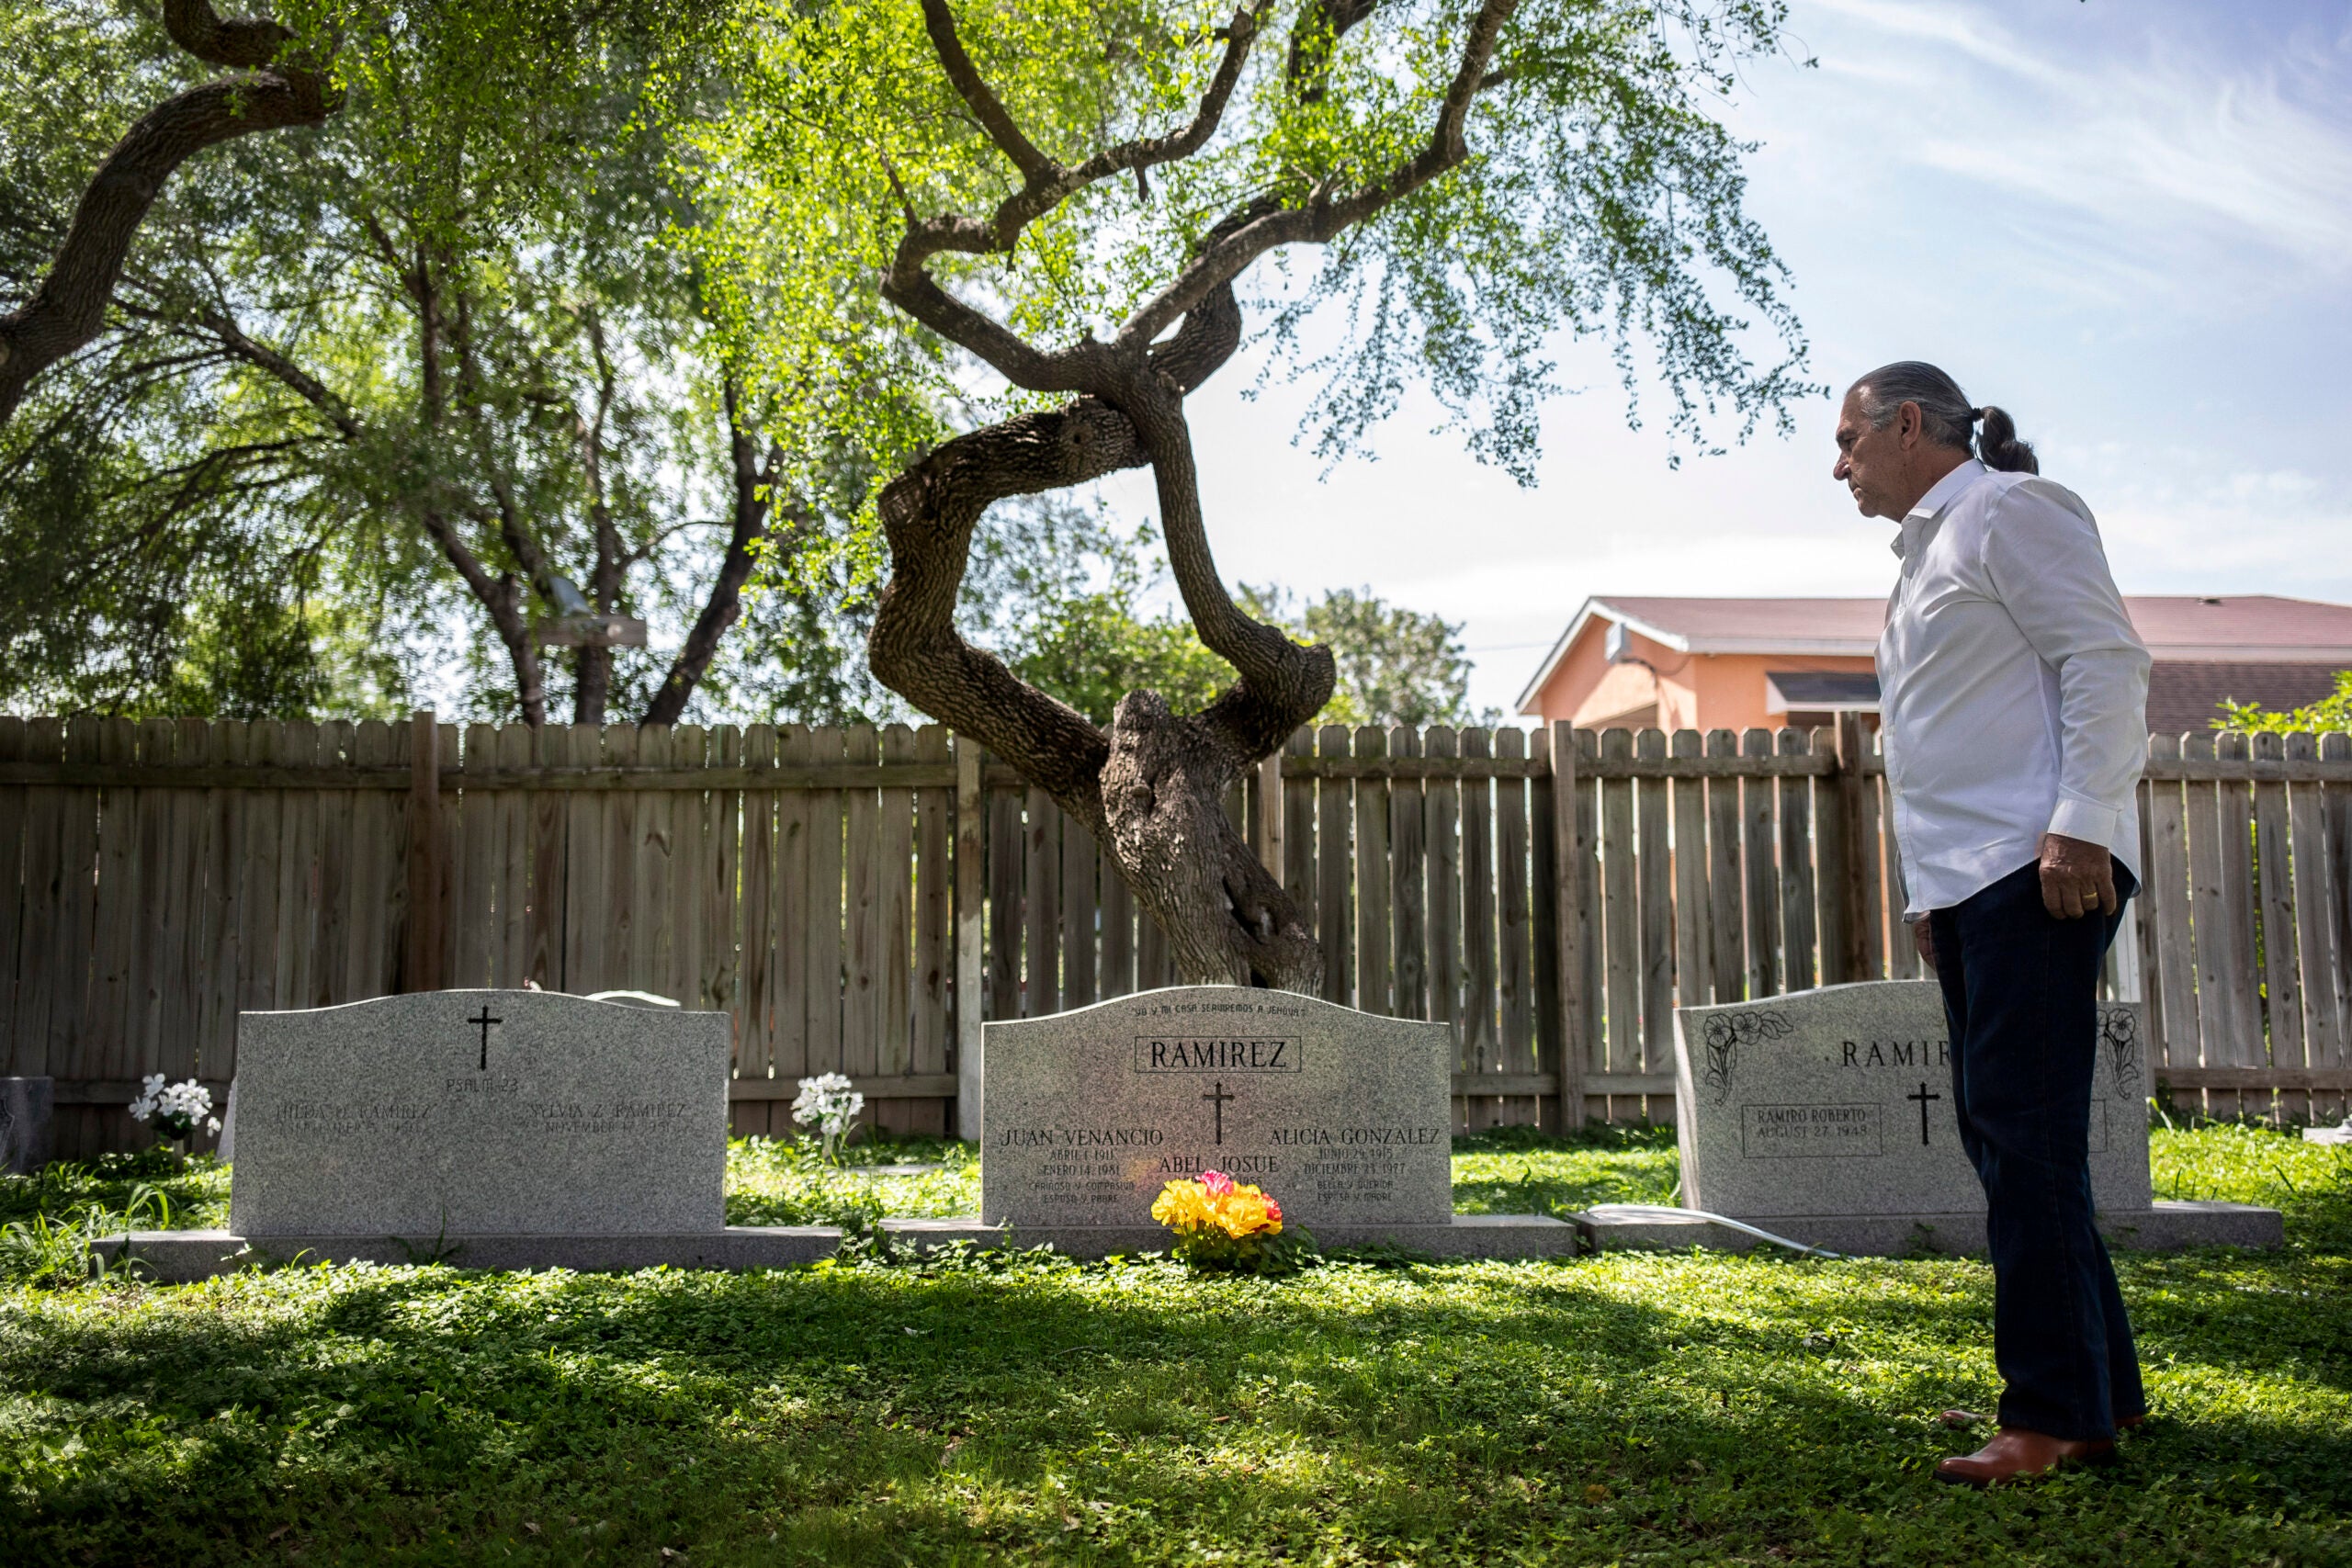 Ramiro Ramirez visits his parents' graves at Jackson Ranch Cemetery in Texas. Trump's wall would make such visits harder.
(Martin do Nascimento / Earthjustice)